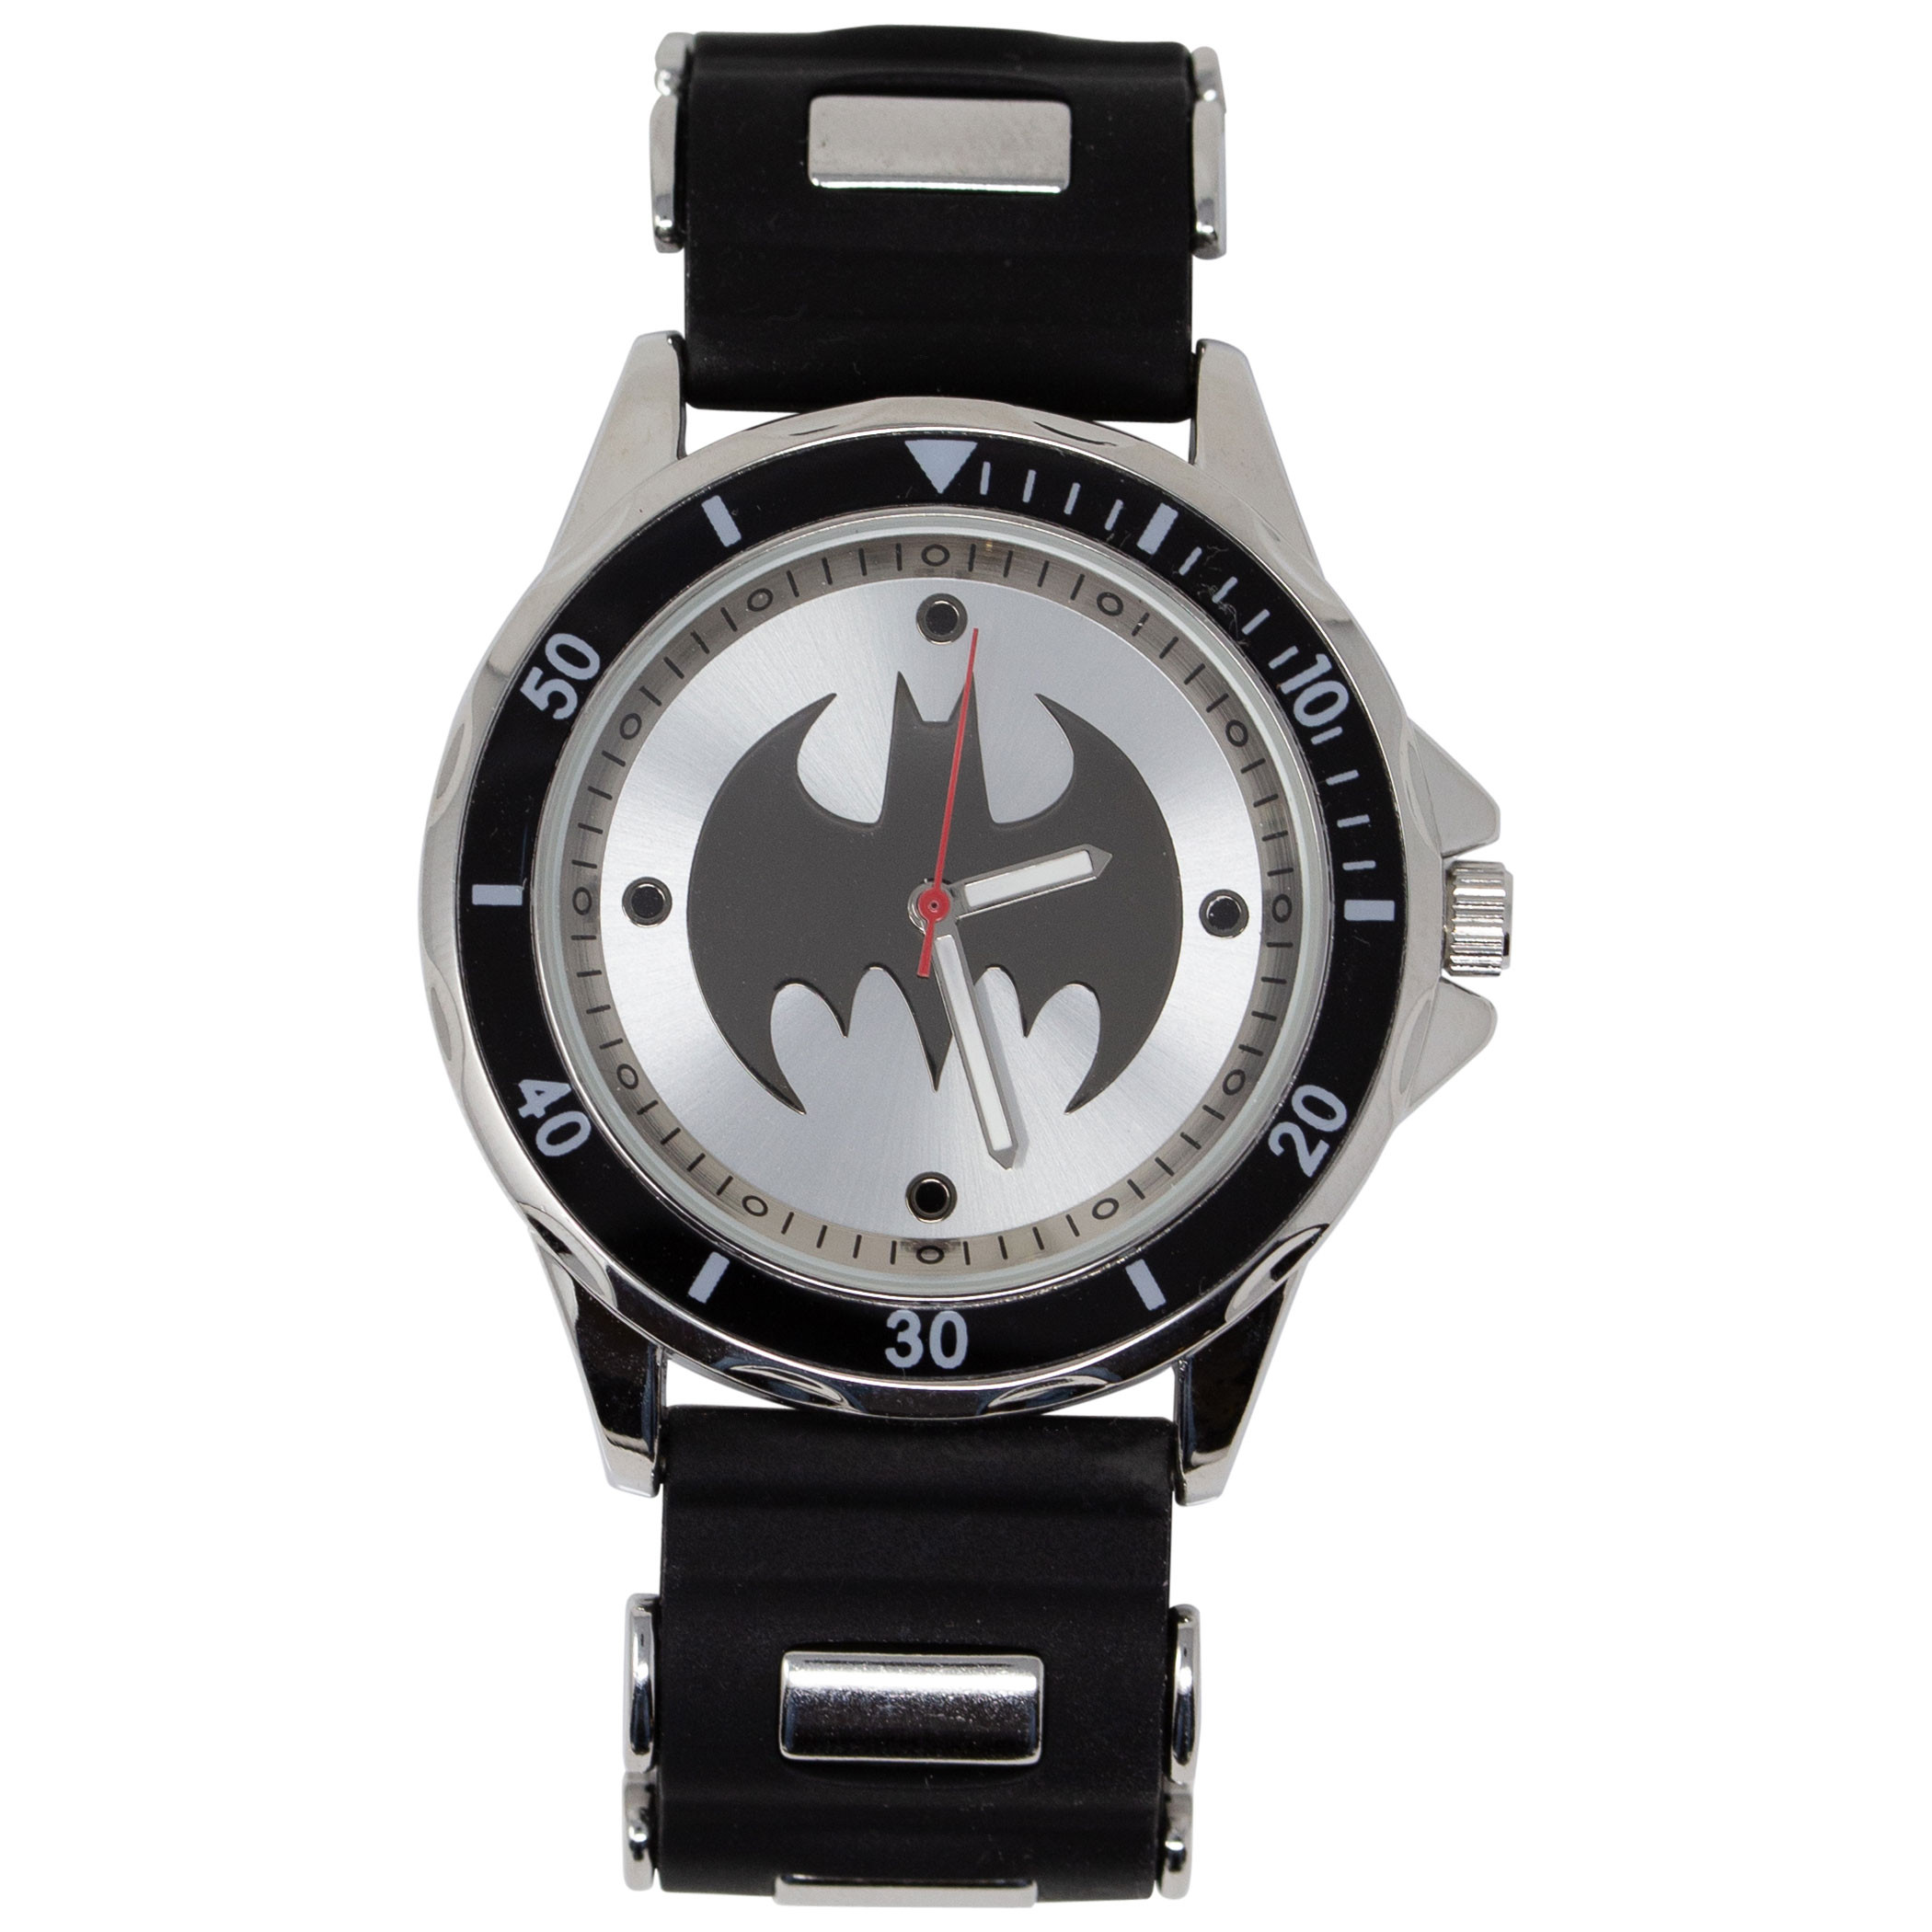 Batman Black and White Symbol Watch with Rubber Wristband